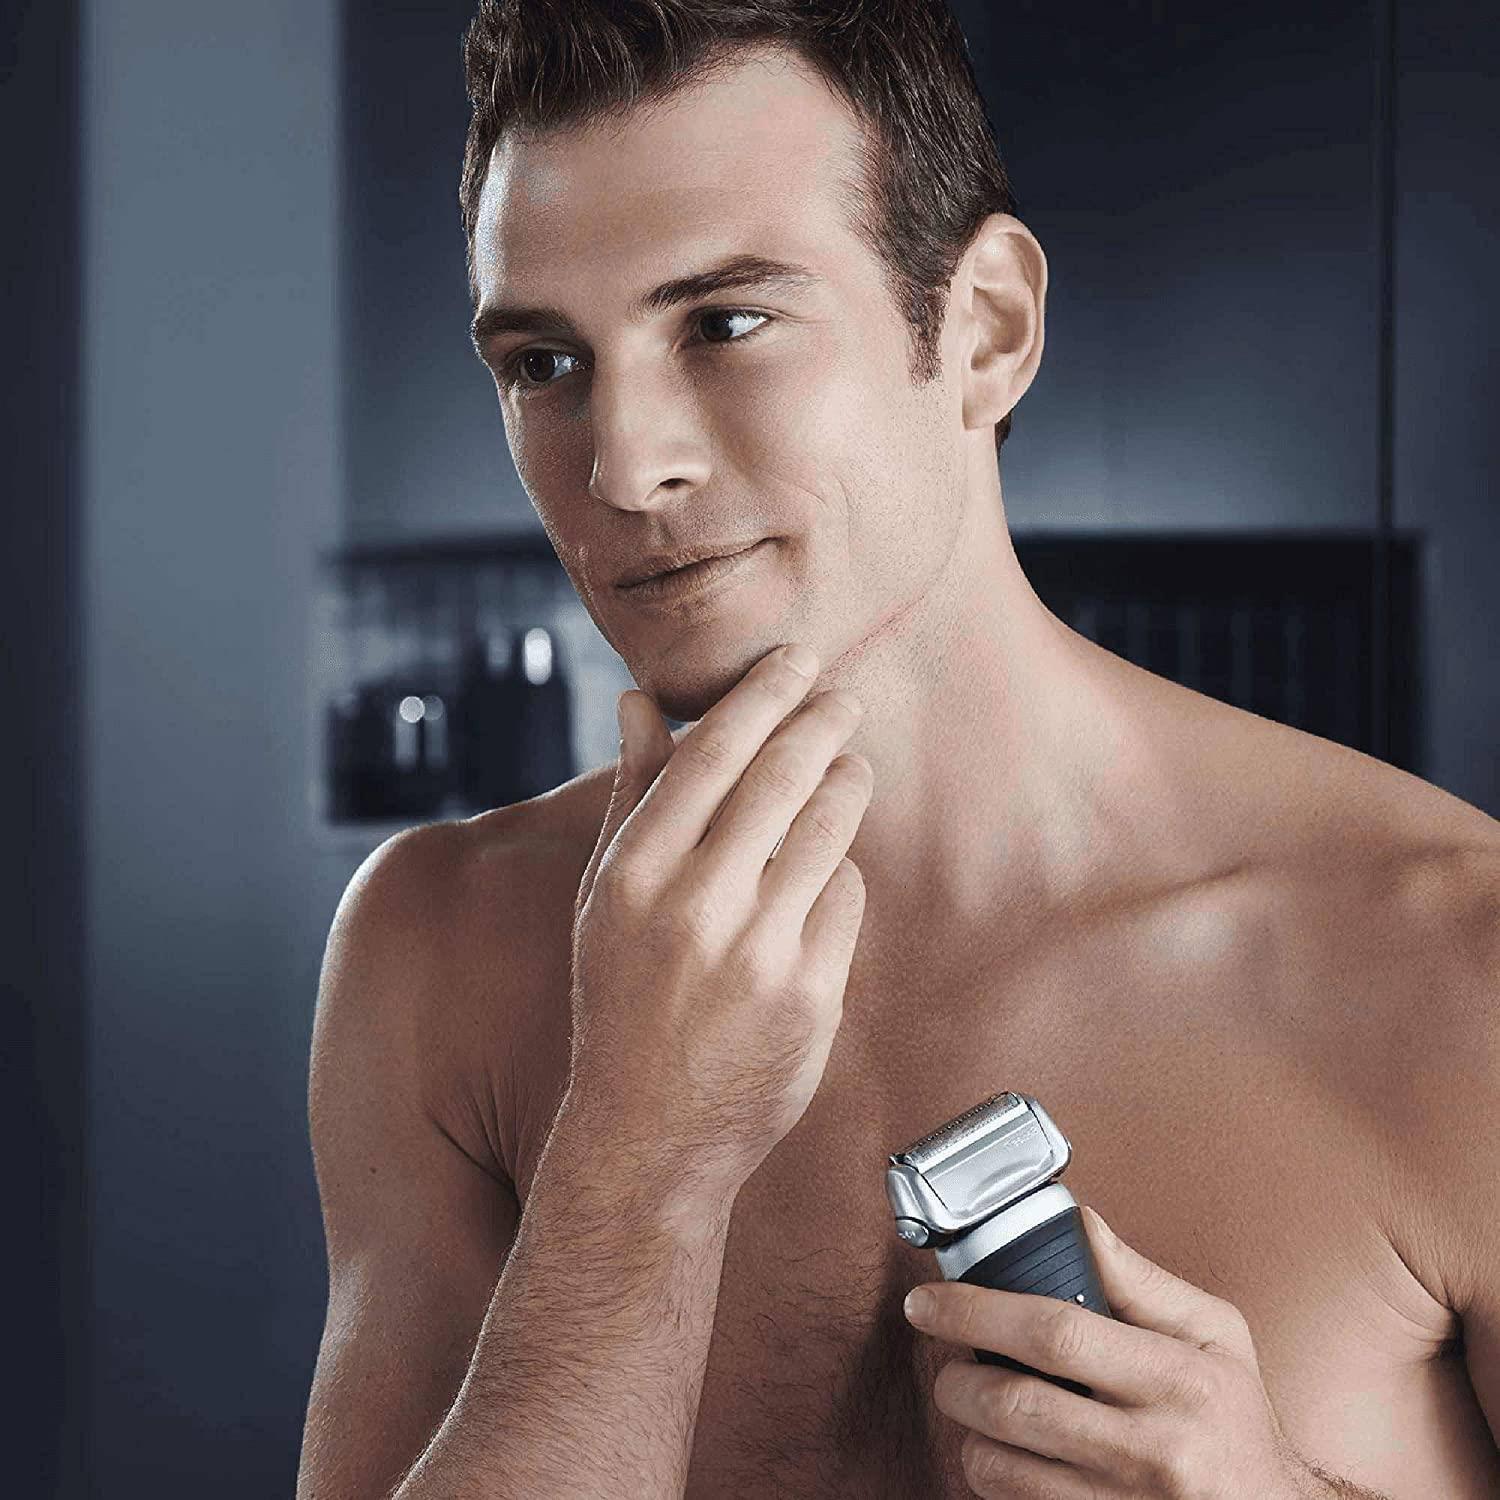 Braun 70B Replacement Foil and Cutter Cassette - Compatible with Older Series 7 Shavers - Healthxpress.ie